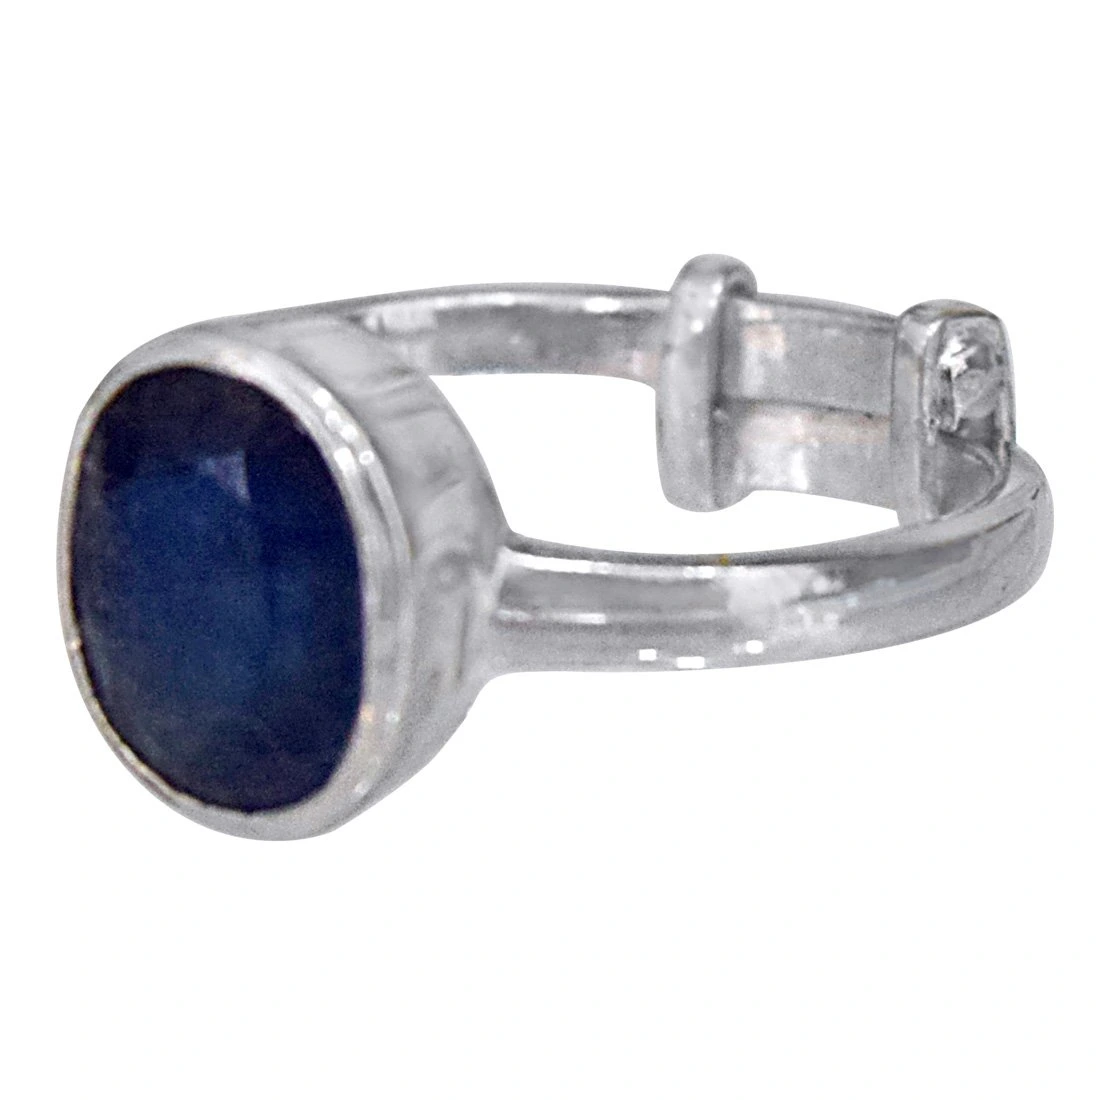 5.69cts Oval Blue Sapphire and 925 Silver Adjustable Ring (GSR63)